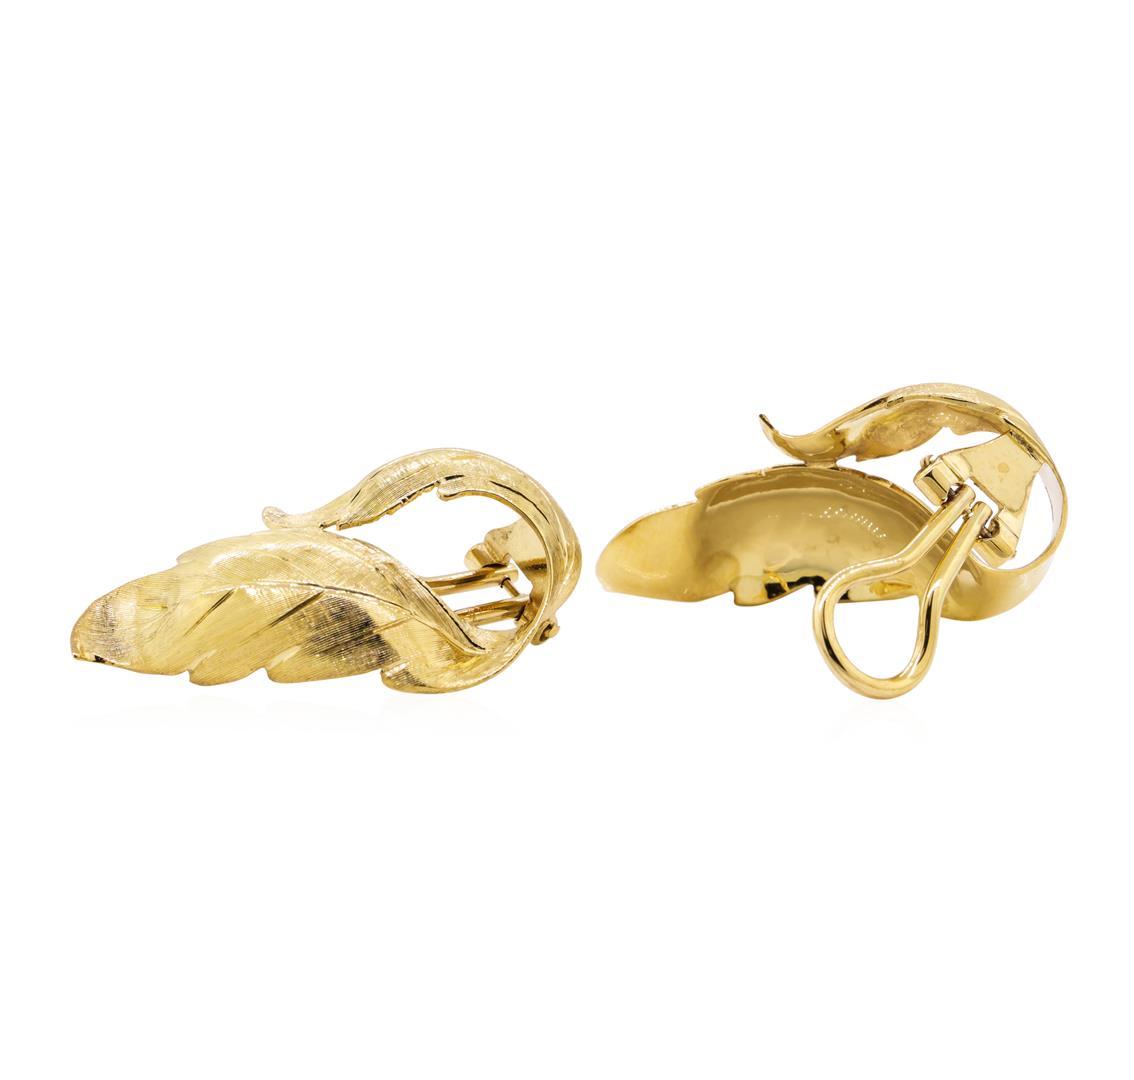 Sculpted Double Leaf Motif Omega Clip Back Earrings - 18KT Yellow Gold